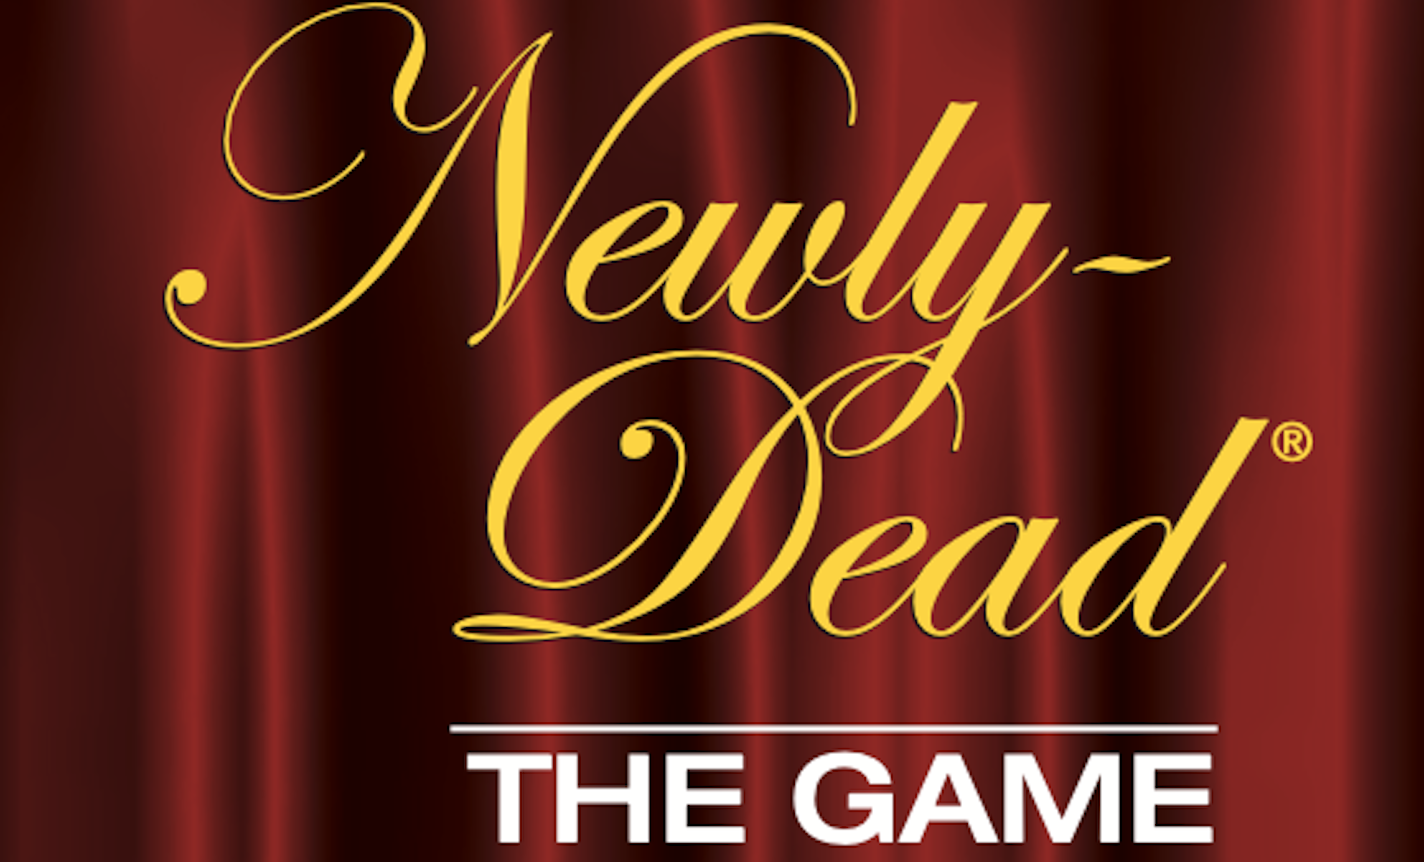 The Newly-Dead Game is coming to NYC